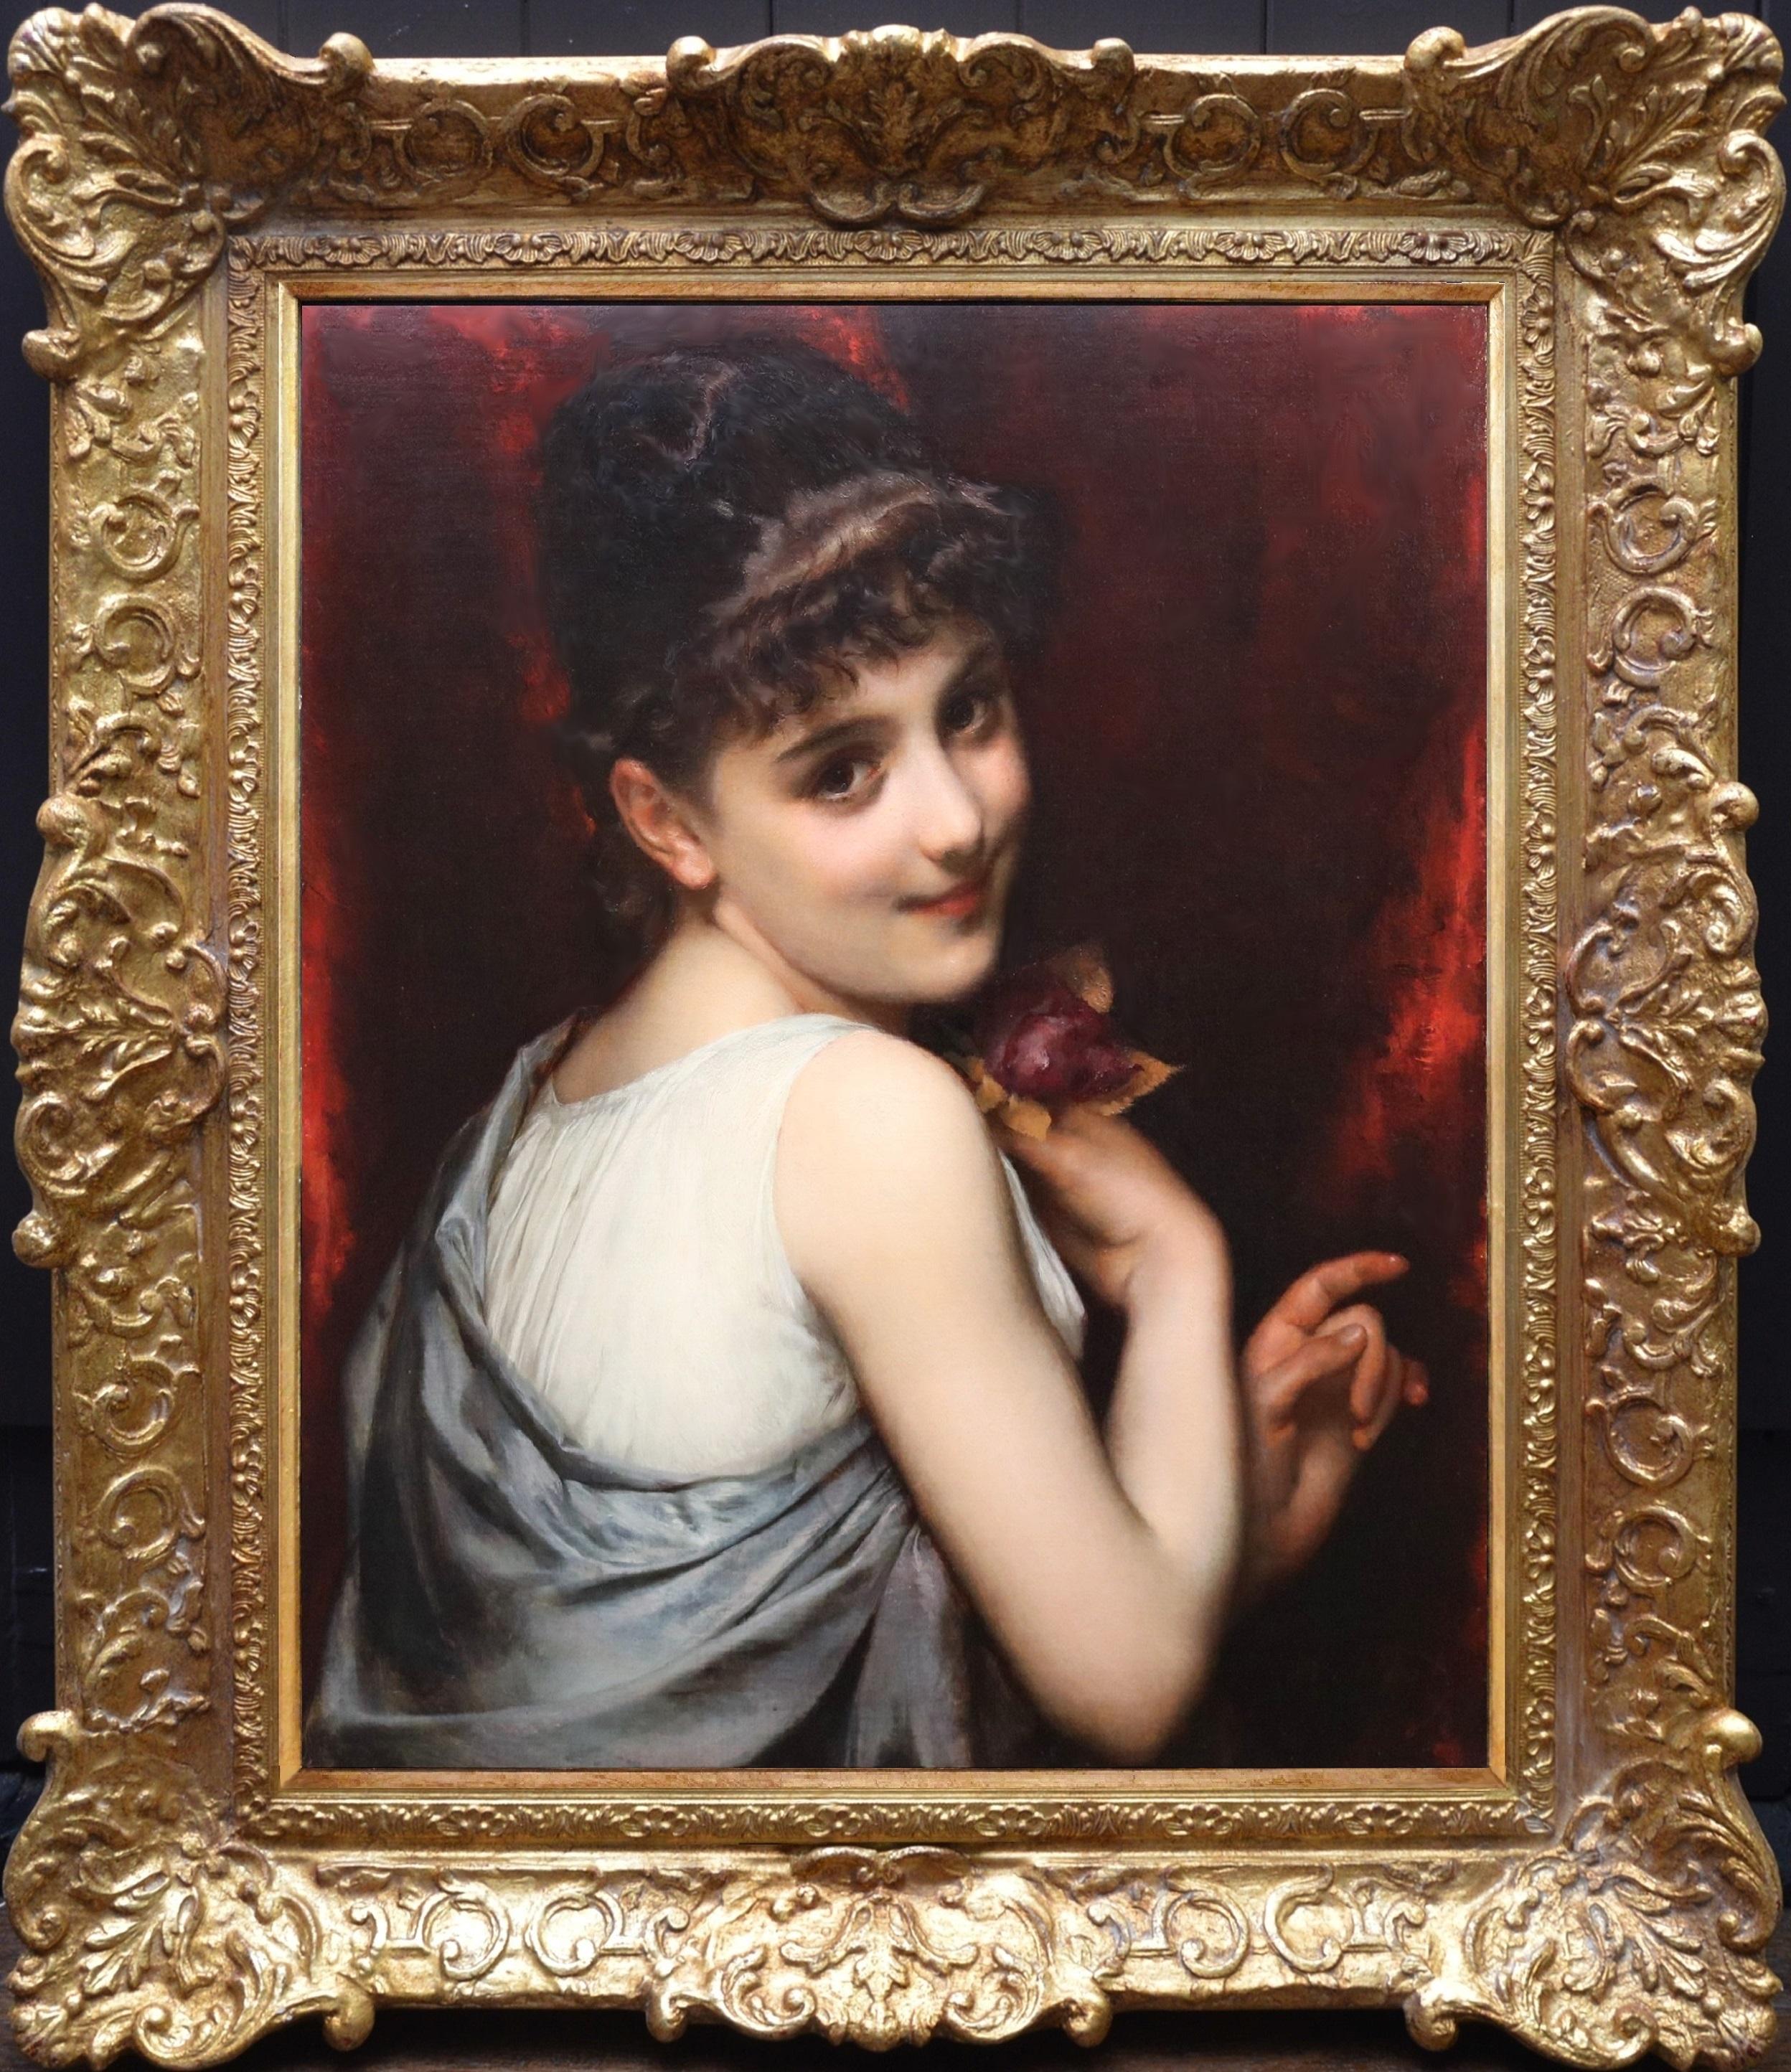 ‘Young Beauty holding a Red Rose’ by Étienne Adolphe Piot (1831-1910). The painting is signed by the artist and hangs in a fine quality gold metal leaf frame.

Academy Fine Paintings only offers artwork for sale in the finest condition it can be for